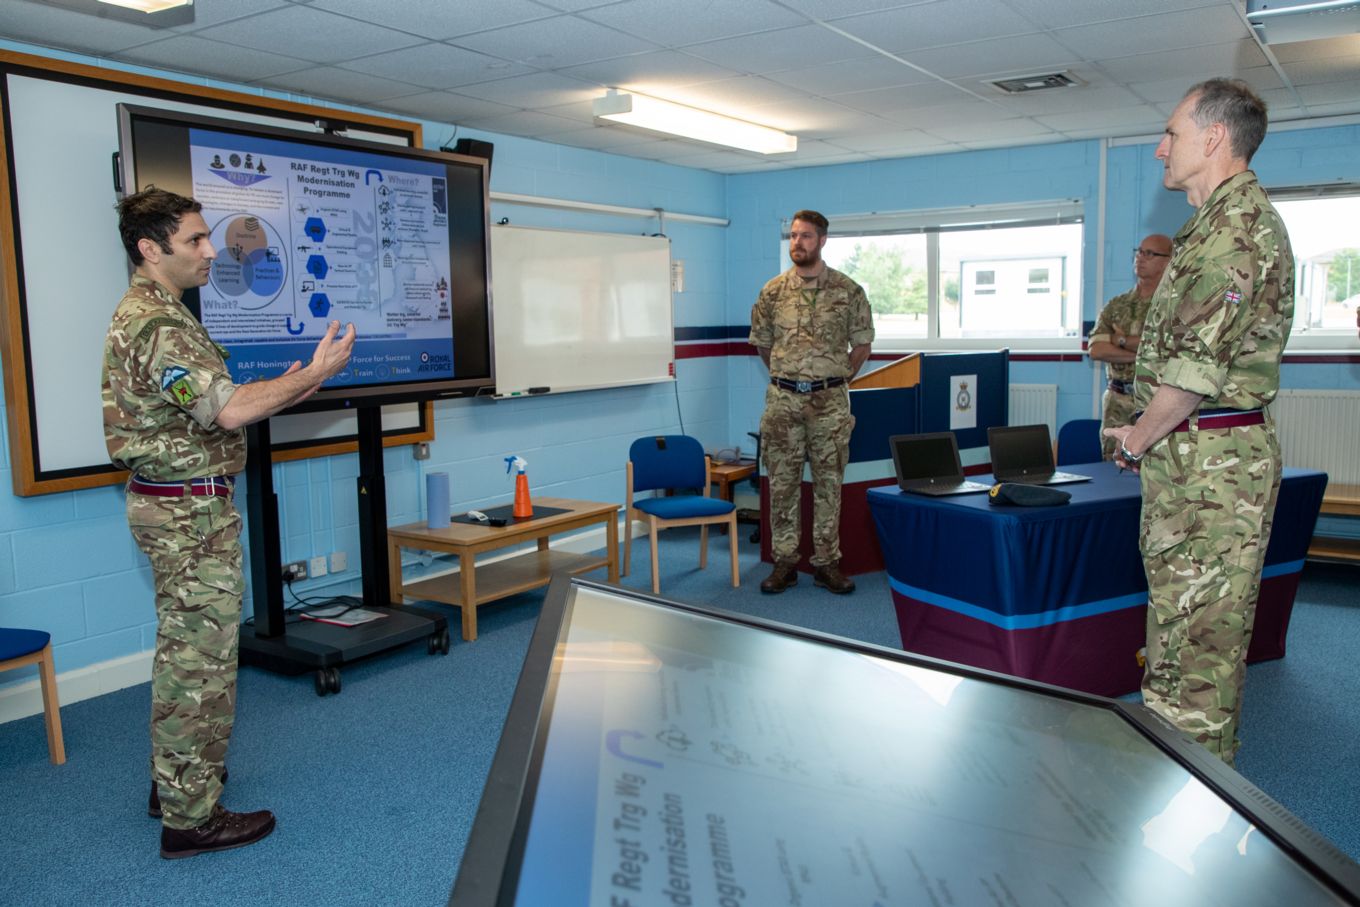 DCom Ops is briefed on Force protection capability and development